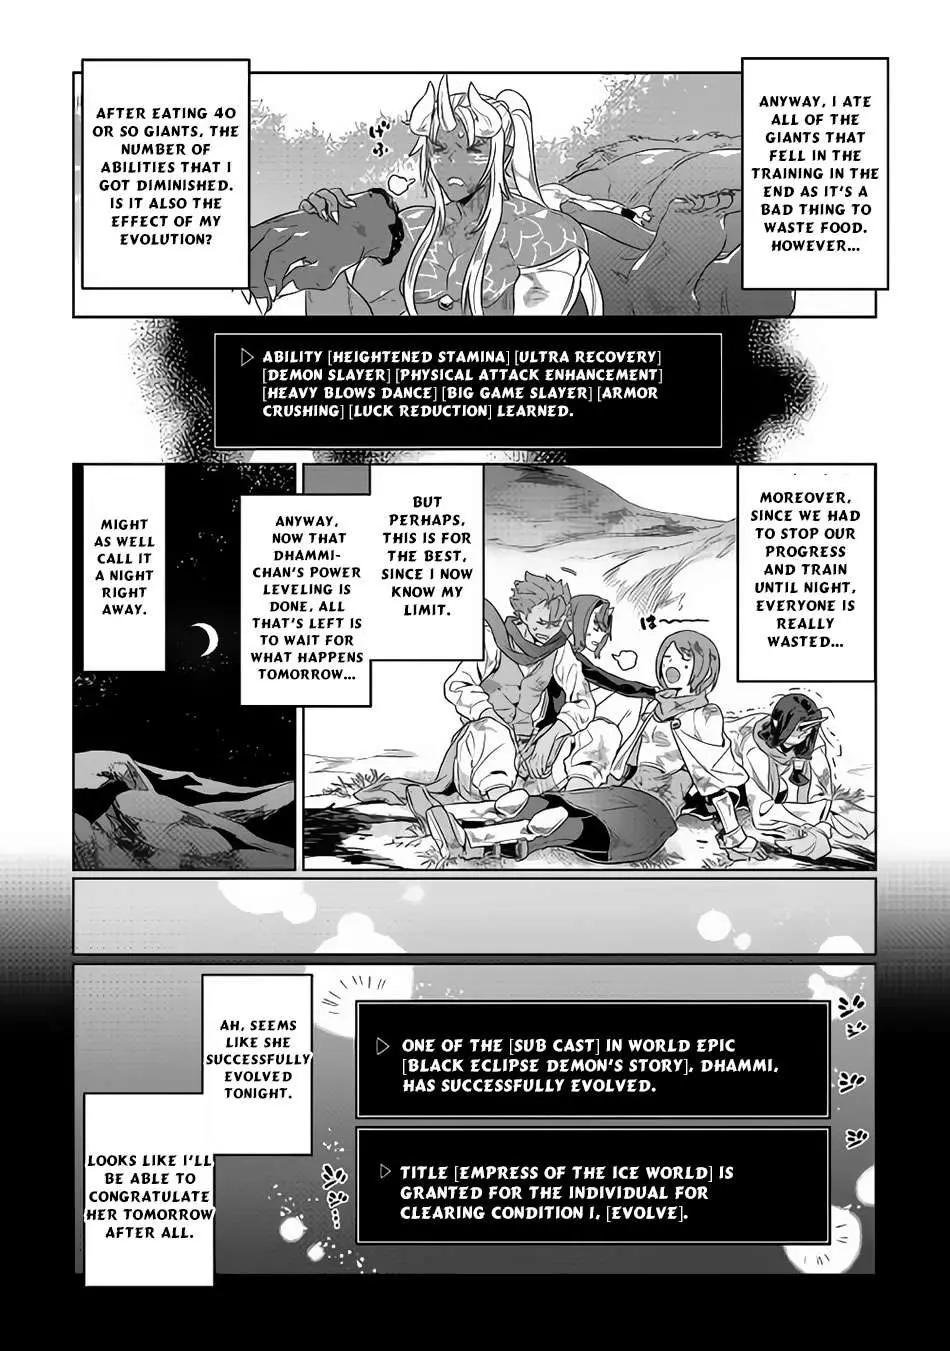 Re:Monster - 50 page 014_5cc4993b2f573